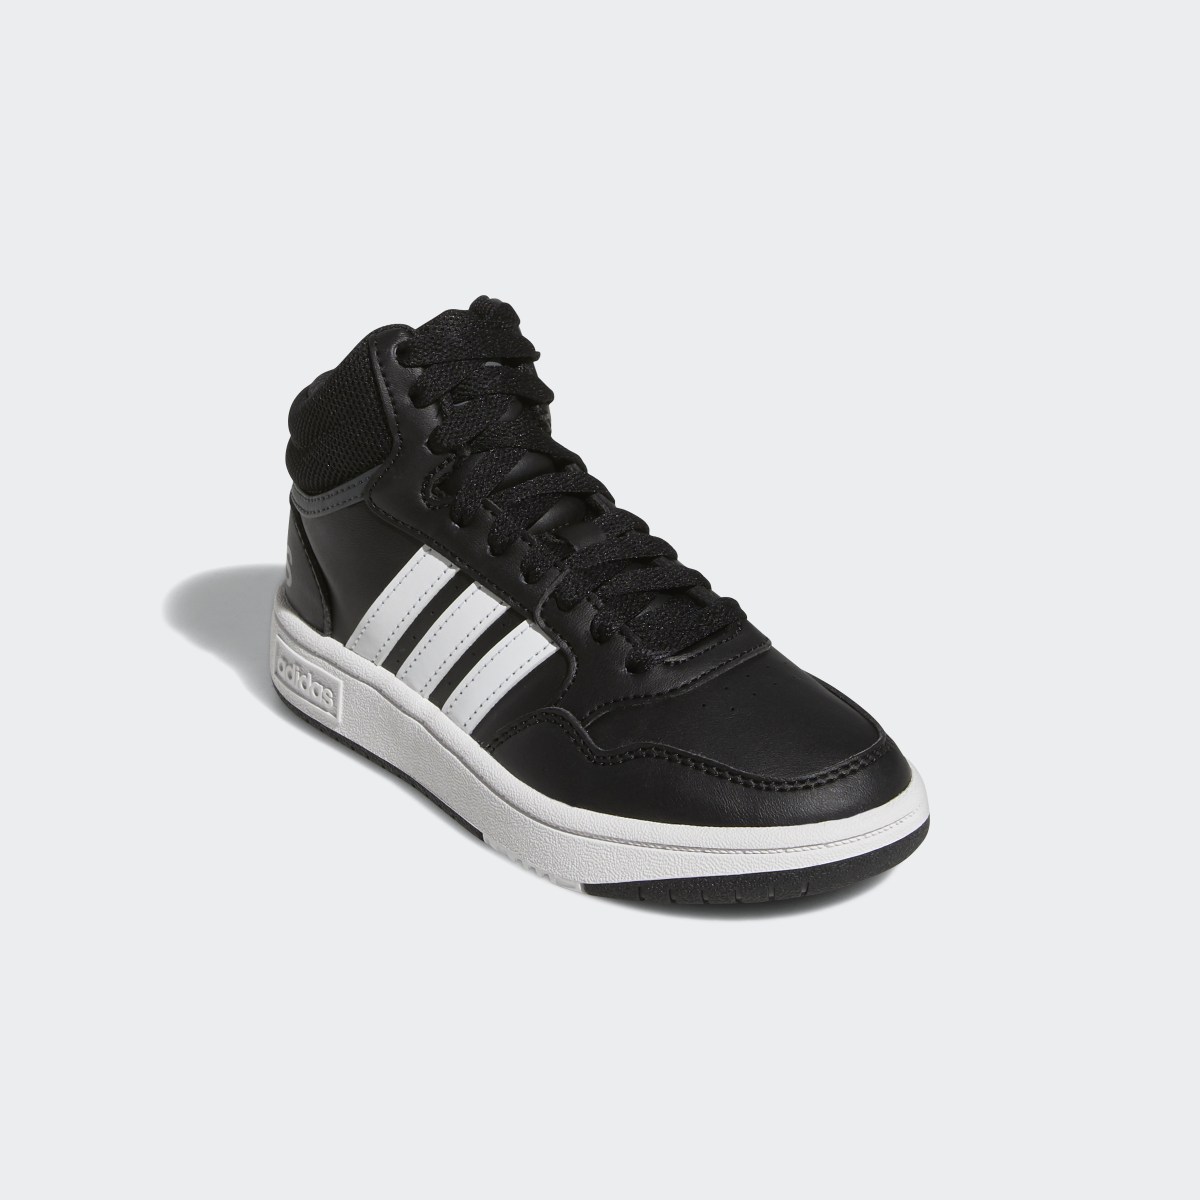 Adidas Hoops Mid Shoes. 5